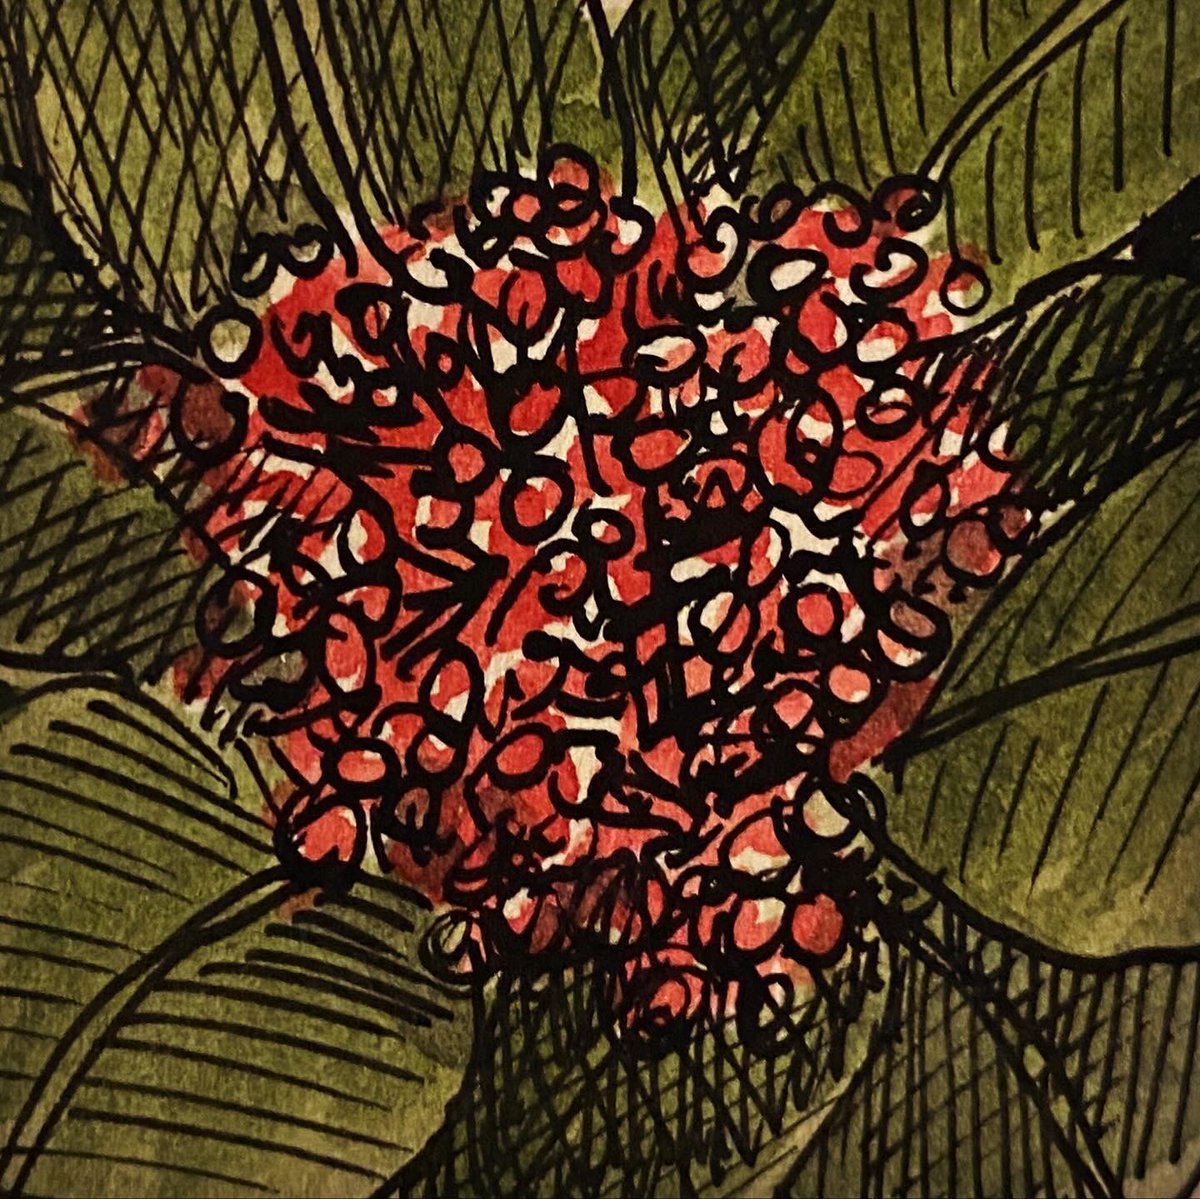 Skimmia Japonica - we have a huge bush of this in the garden although I never knew the name of it until now. Looks great though 😊👍🌳 #100flowersin100Days to keep my hand sketching through the winter. #floralart #100dayproject #createdaily